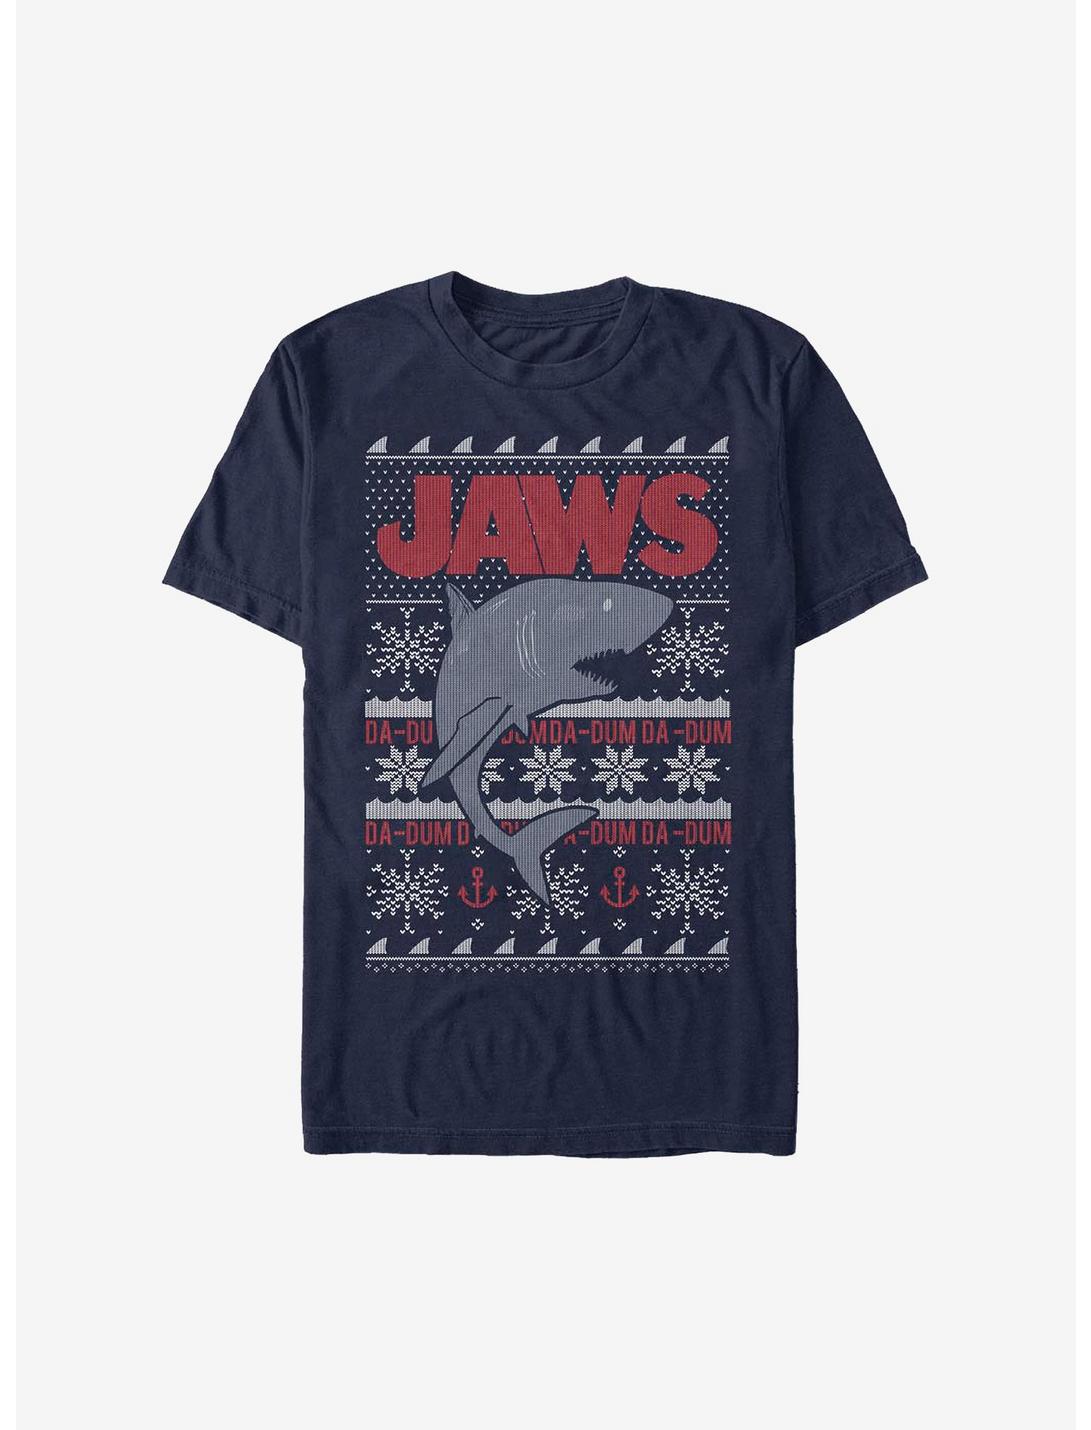 Plus Size Jaws Christmas Pattern Sweater T-Shirt, NAVY, hi-res